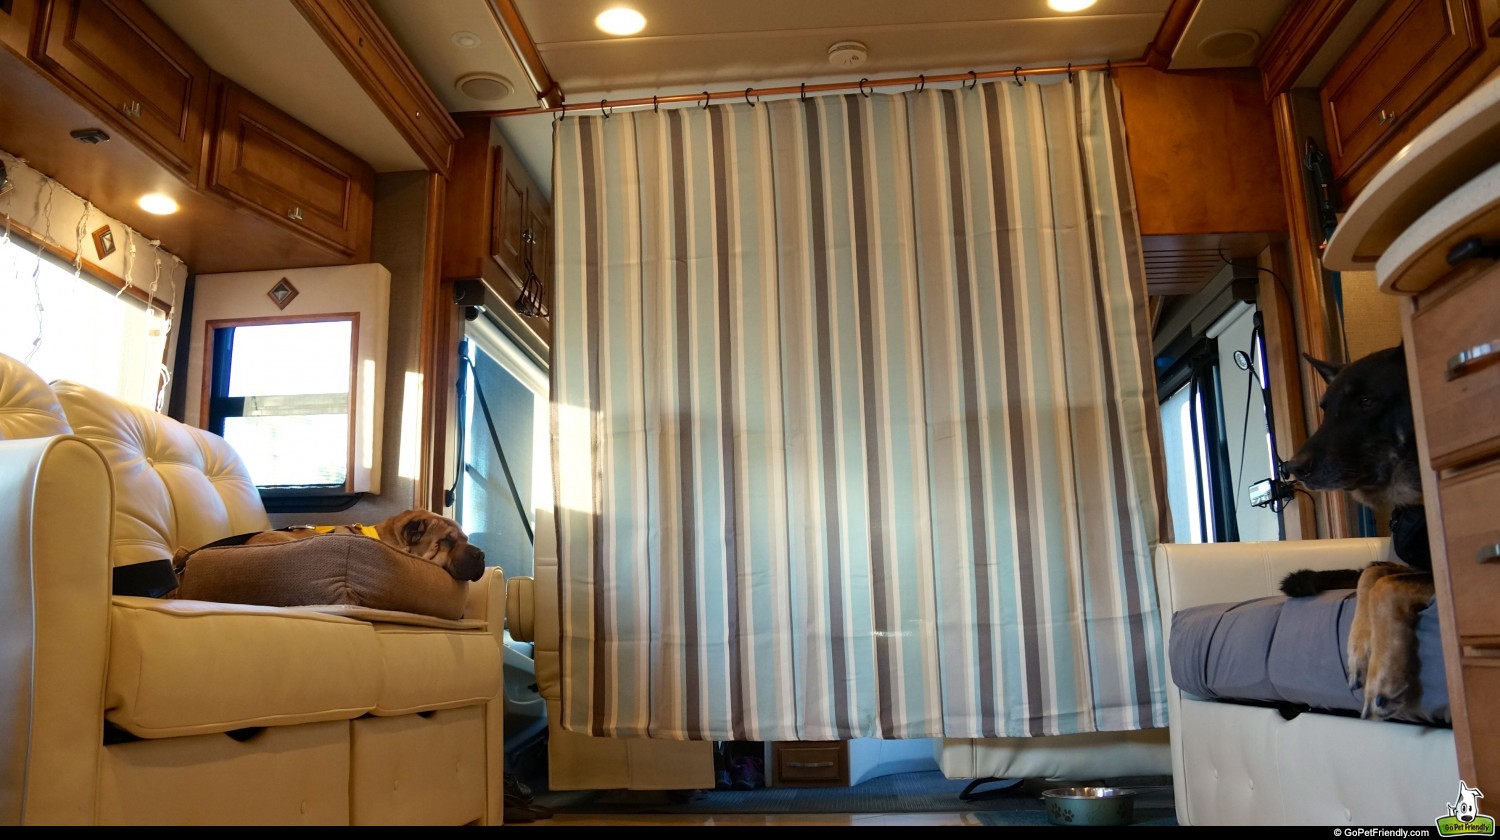 Shower curtain blocking the view out the windshield for two dogs riding in a motorhome